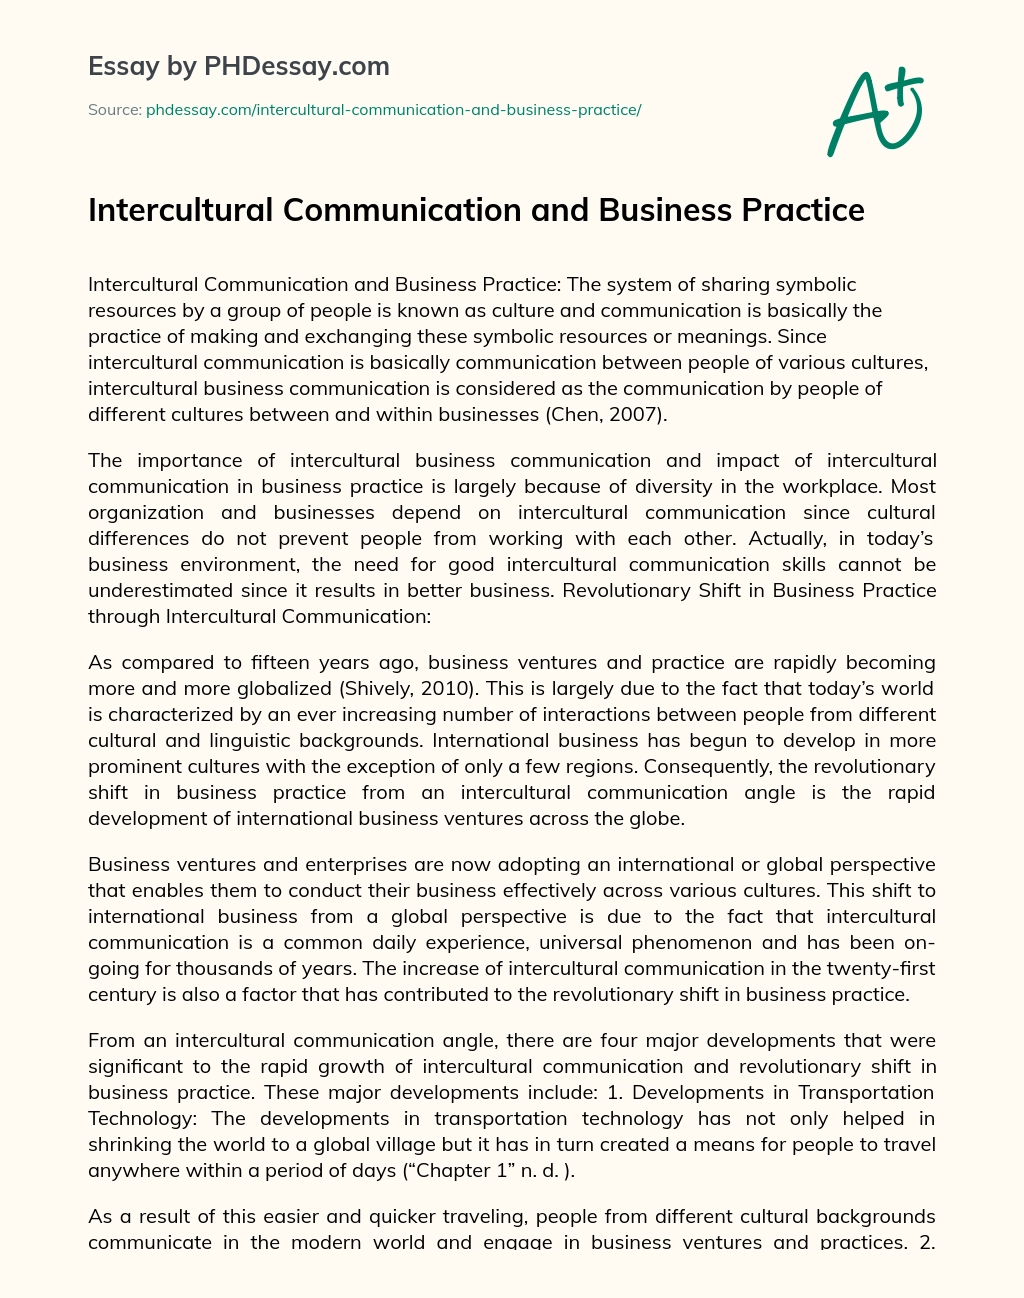 Intercultural Communication and Business Practice essay